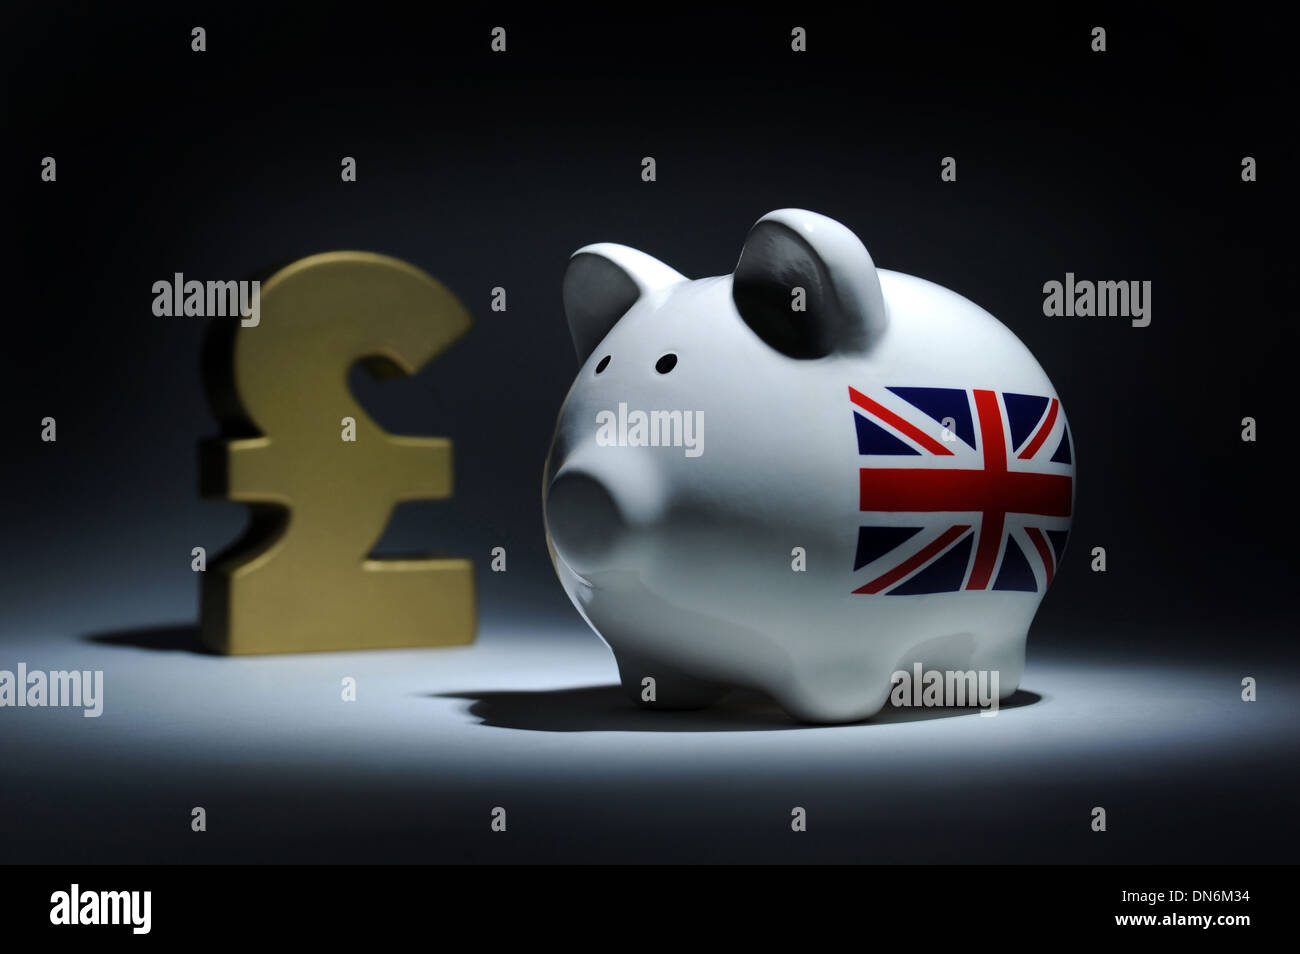 PIGGY BANK WITH UNION JACK AND POUND SIGN RE WAGES THE ECONOMY INCOME HOUSEHOLD BUDGET MONEY MARKETS CASH SAVINGS INTEREST RATES Stock Photo